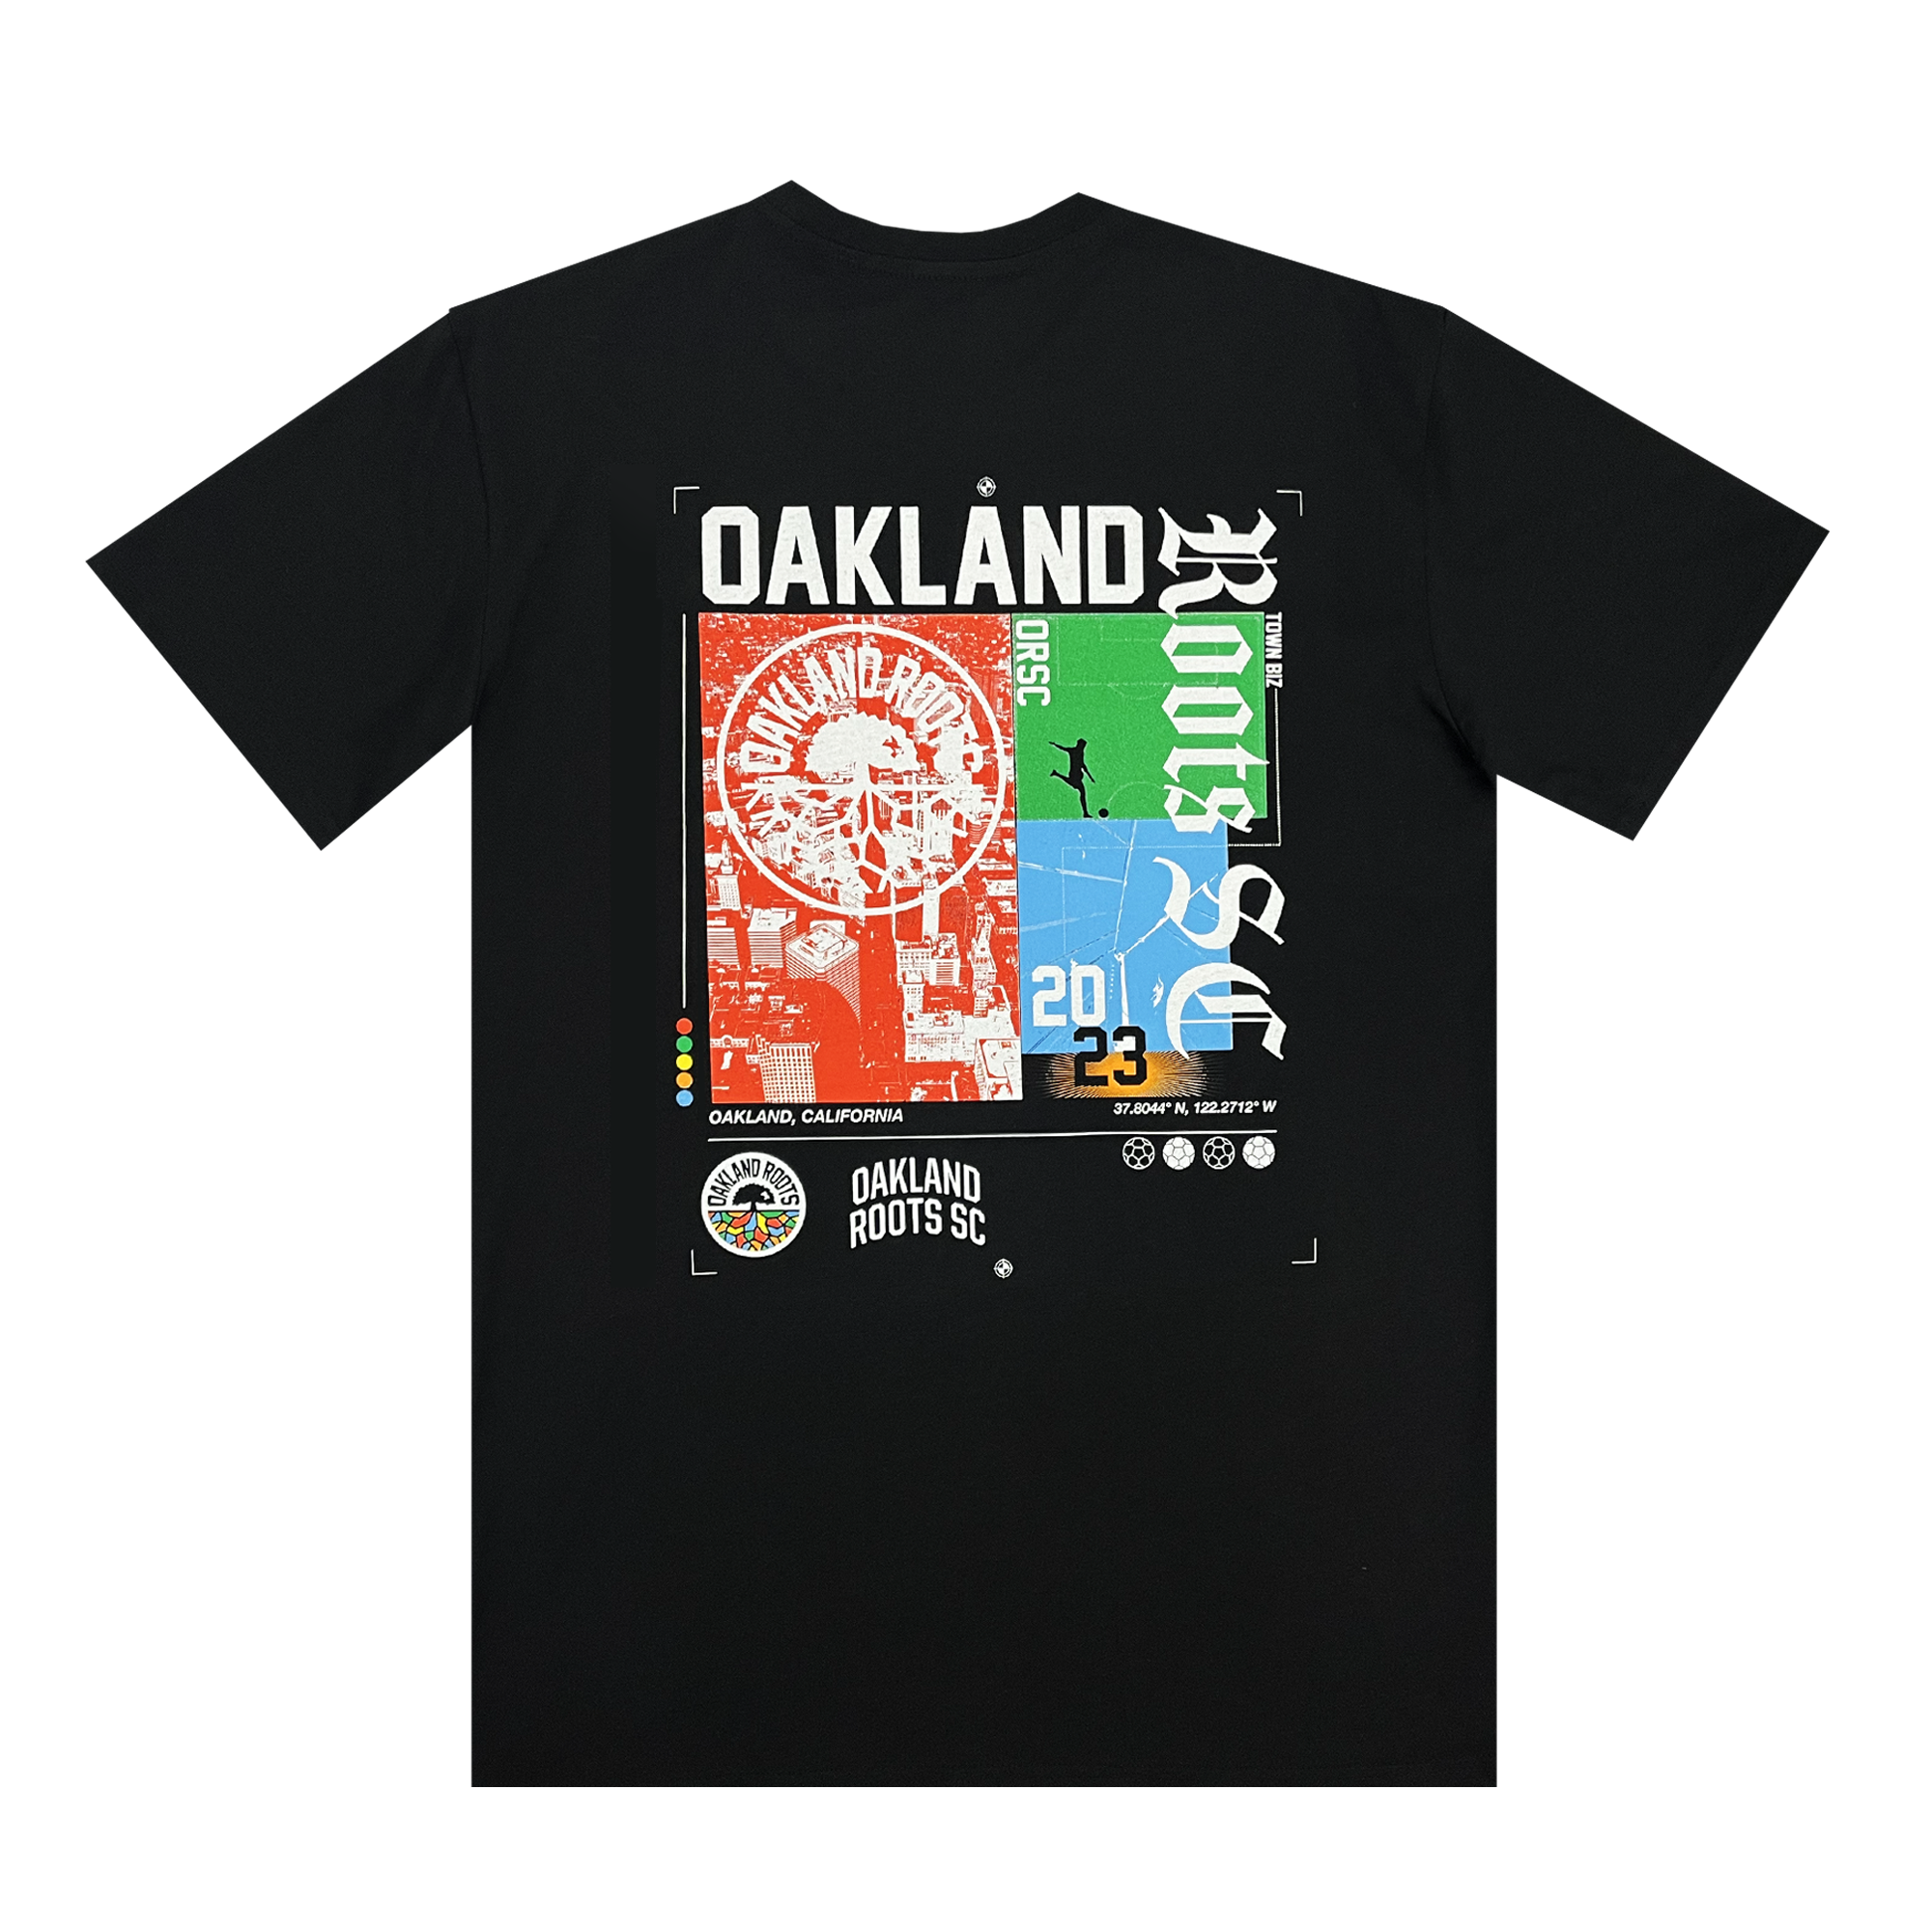 Back view of black t-shirt with a large multi-color Futboltown Oakland Roots SC graphic, wordmarks and logos.